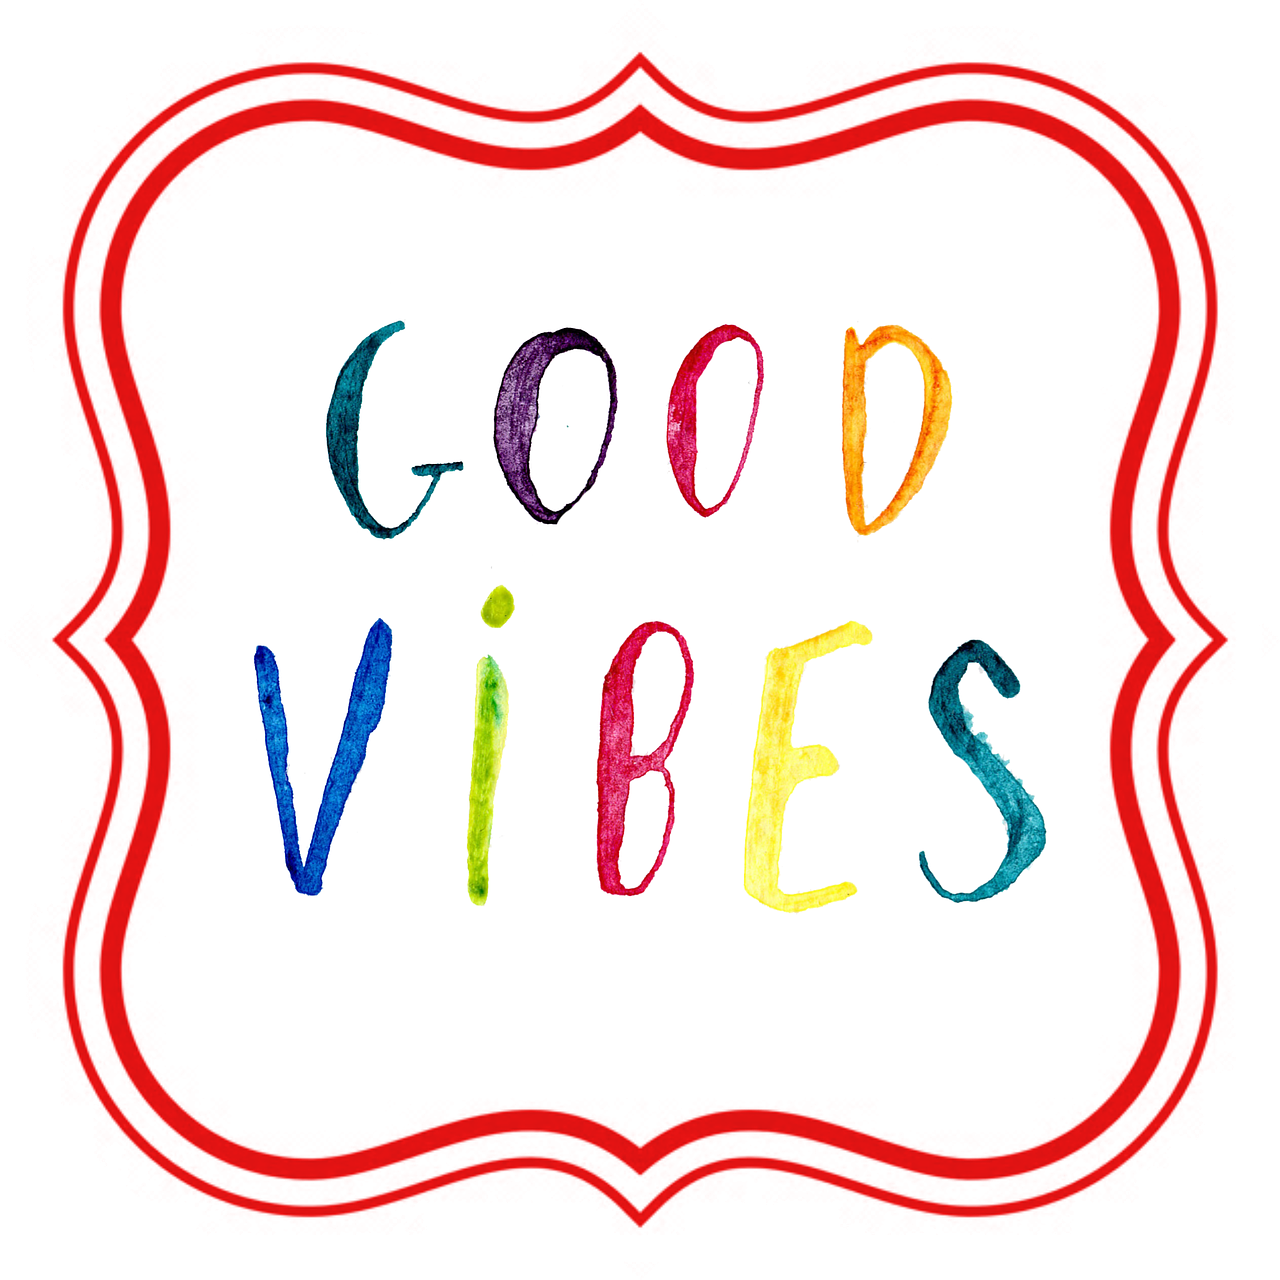 Good vibes,positive,colorful,tag,label - free image from needpix.com